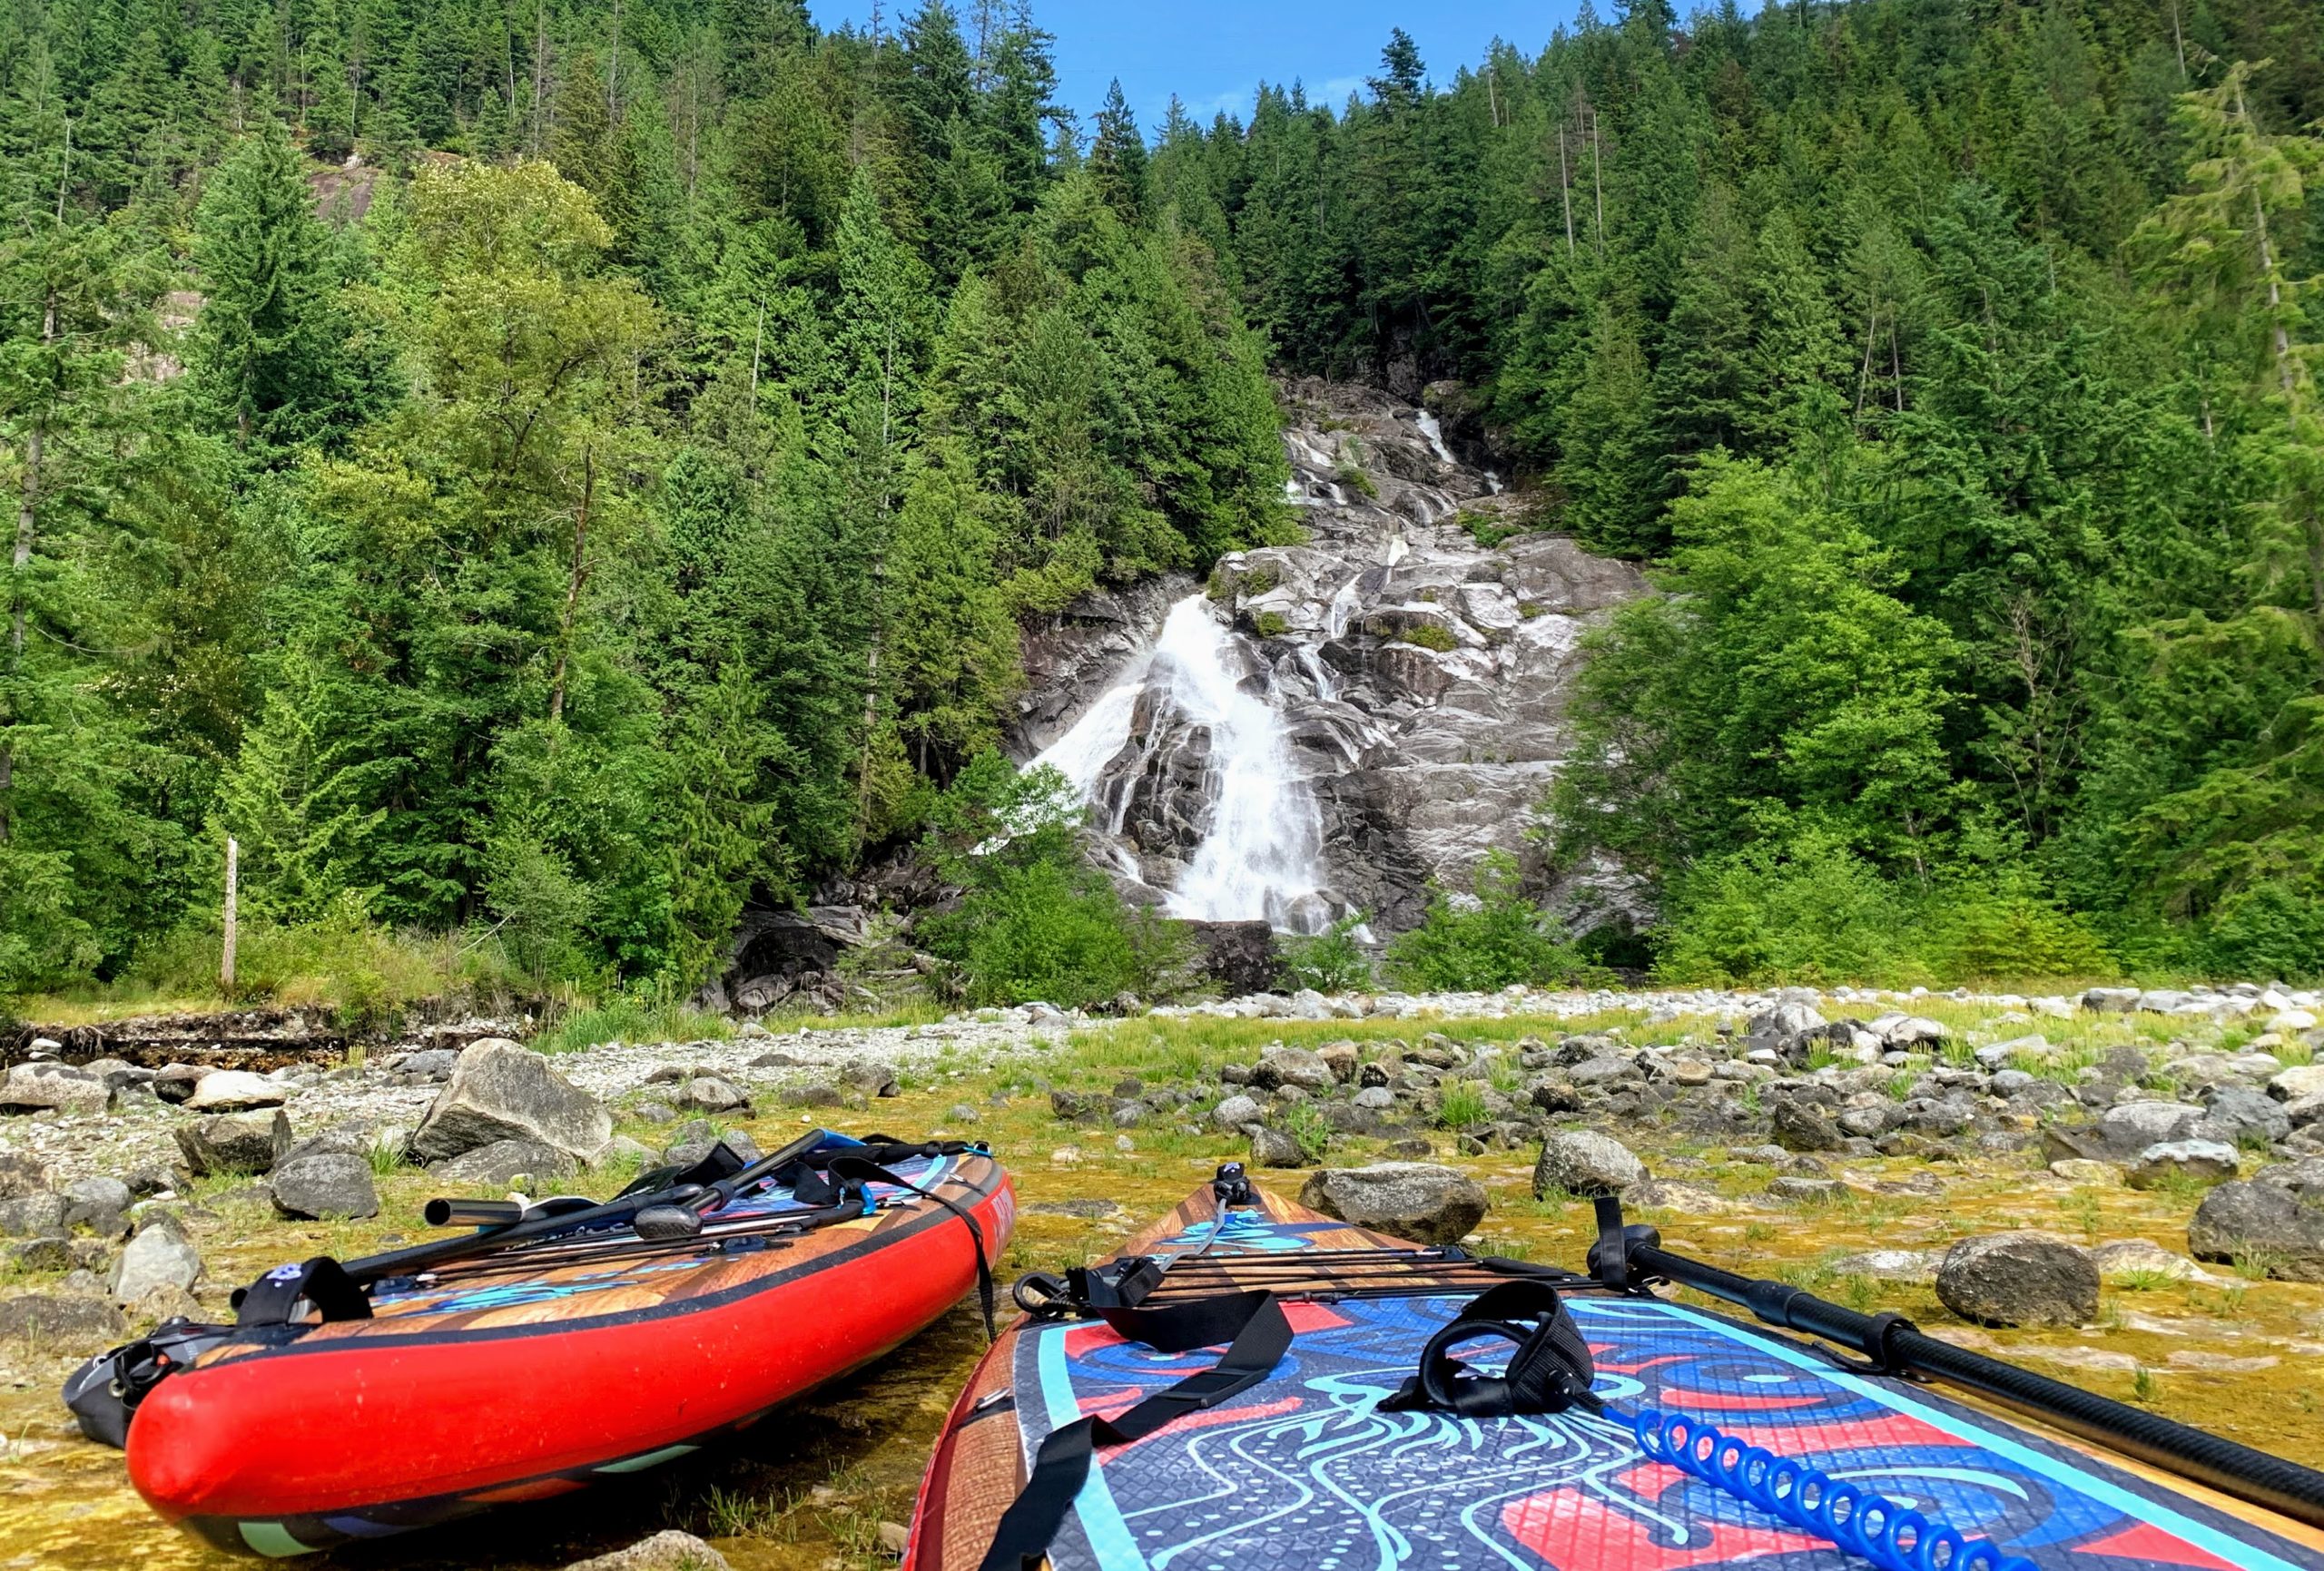 Granite Falls Paddle Camping: Out Of This World!